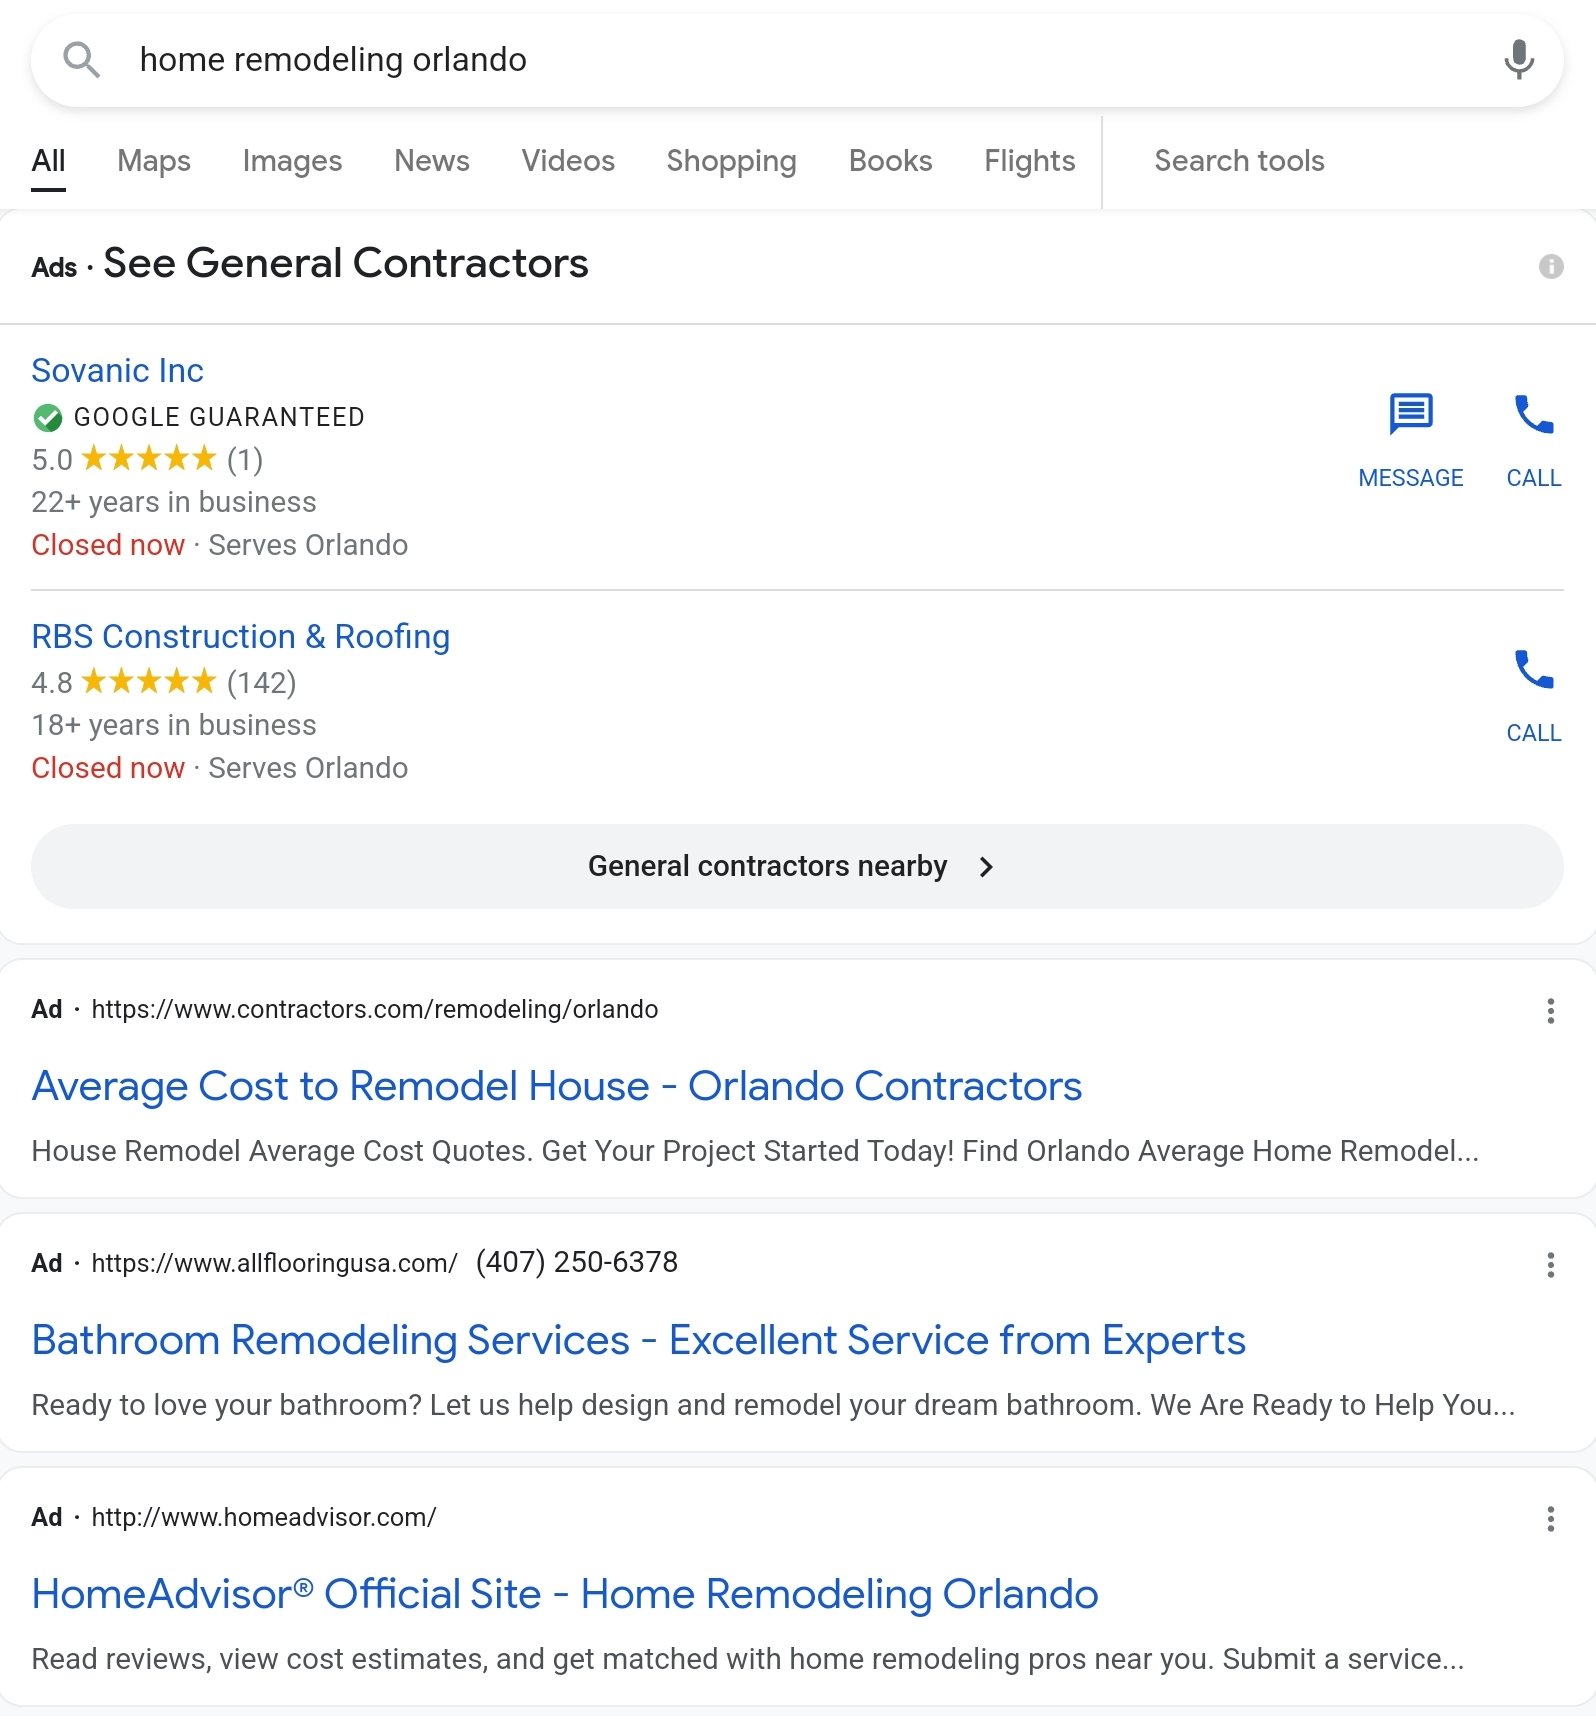 Google Search Network paid ads for home remodeling in Orlando